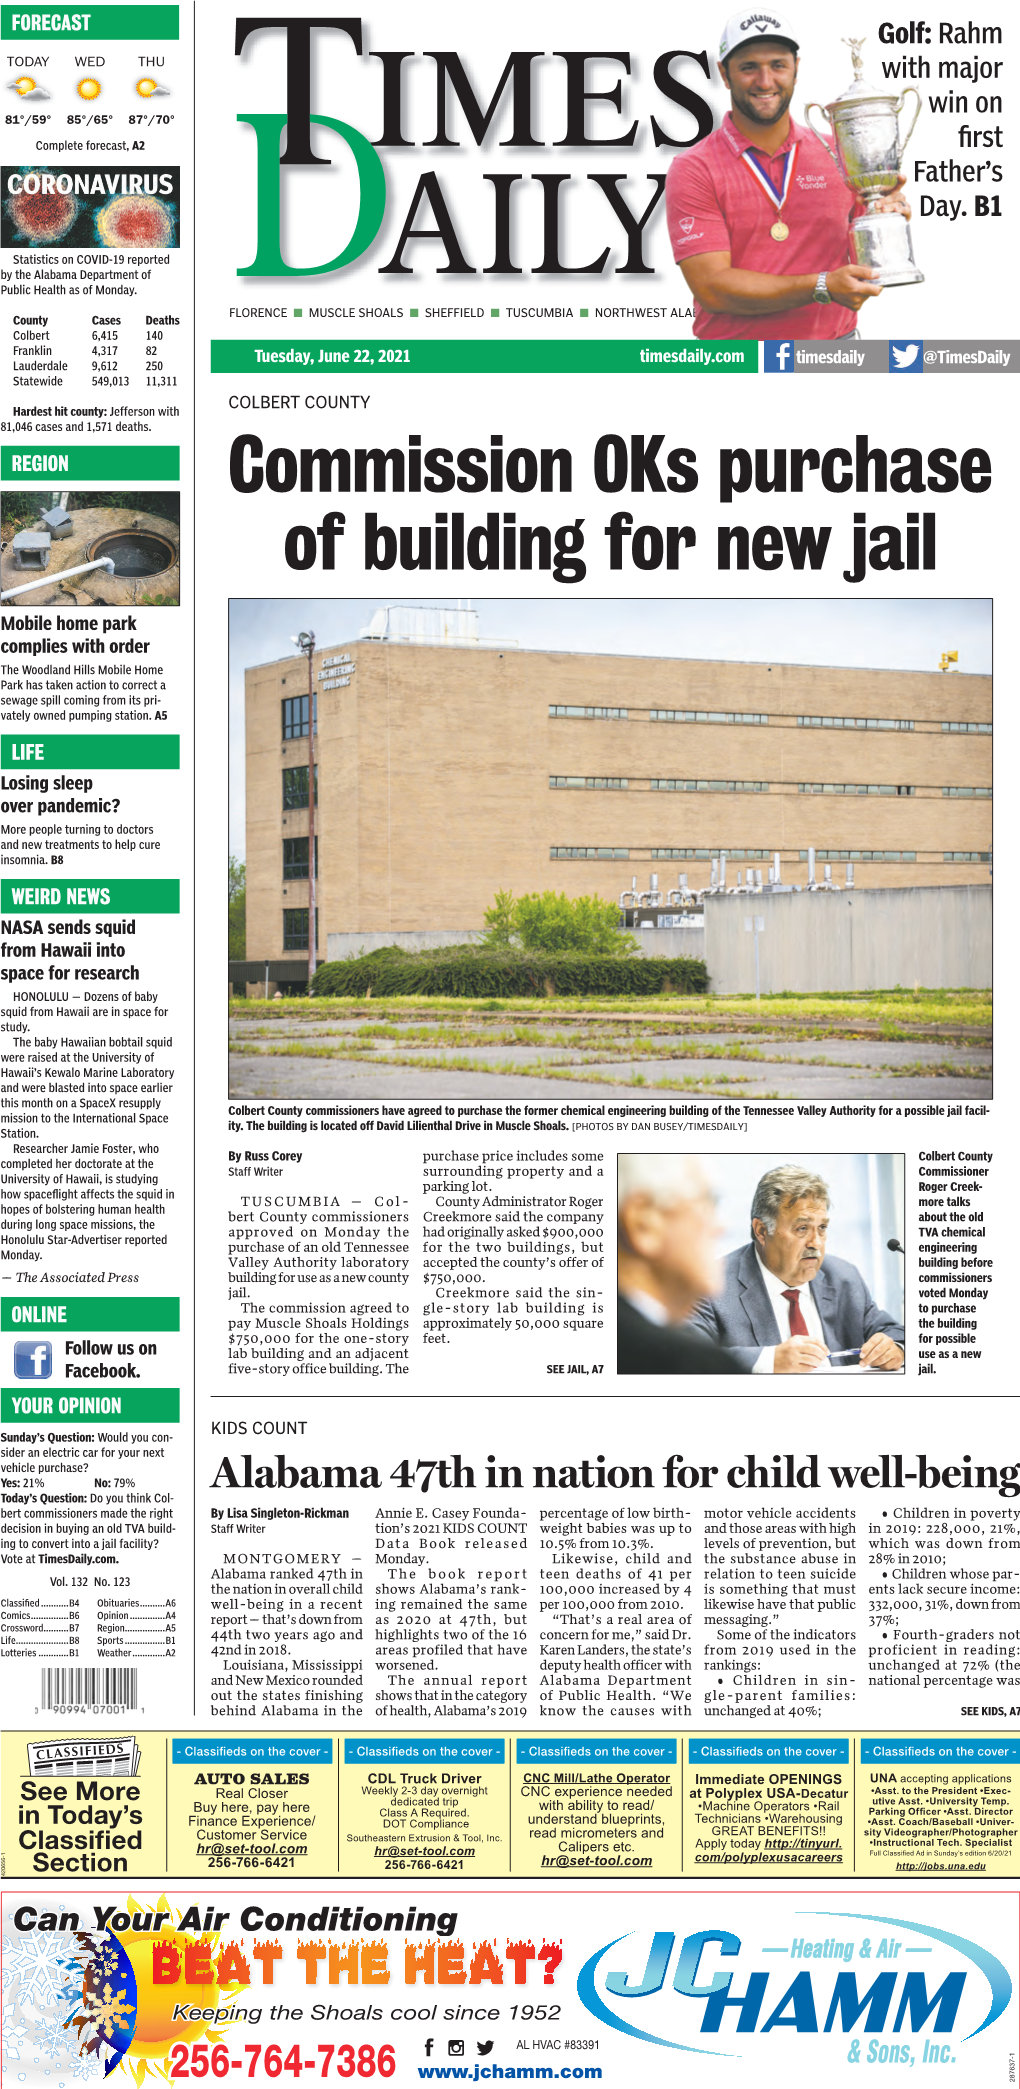 Commission Oks Purchase of Building for New Jail